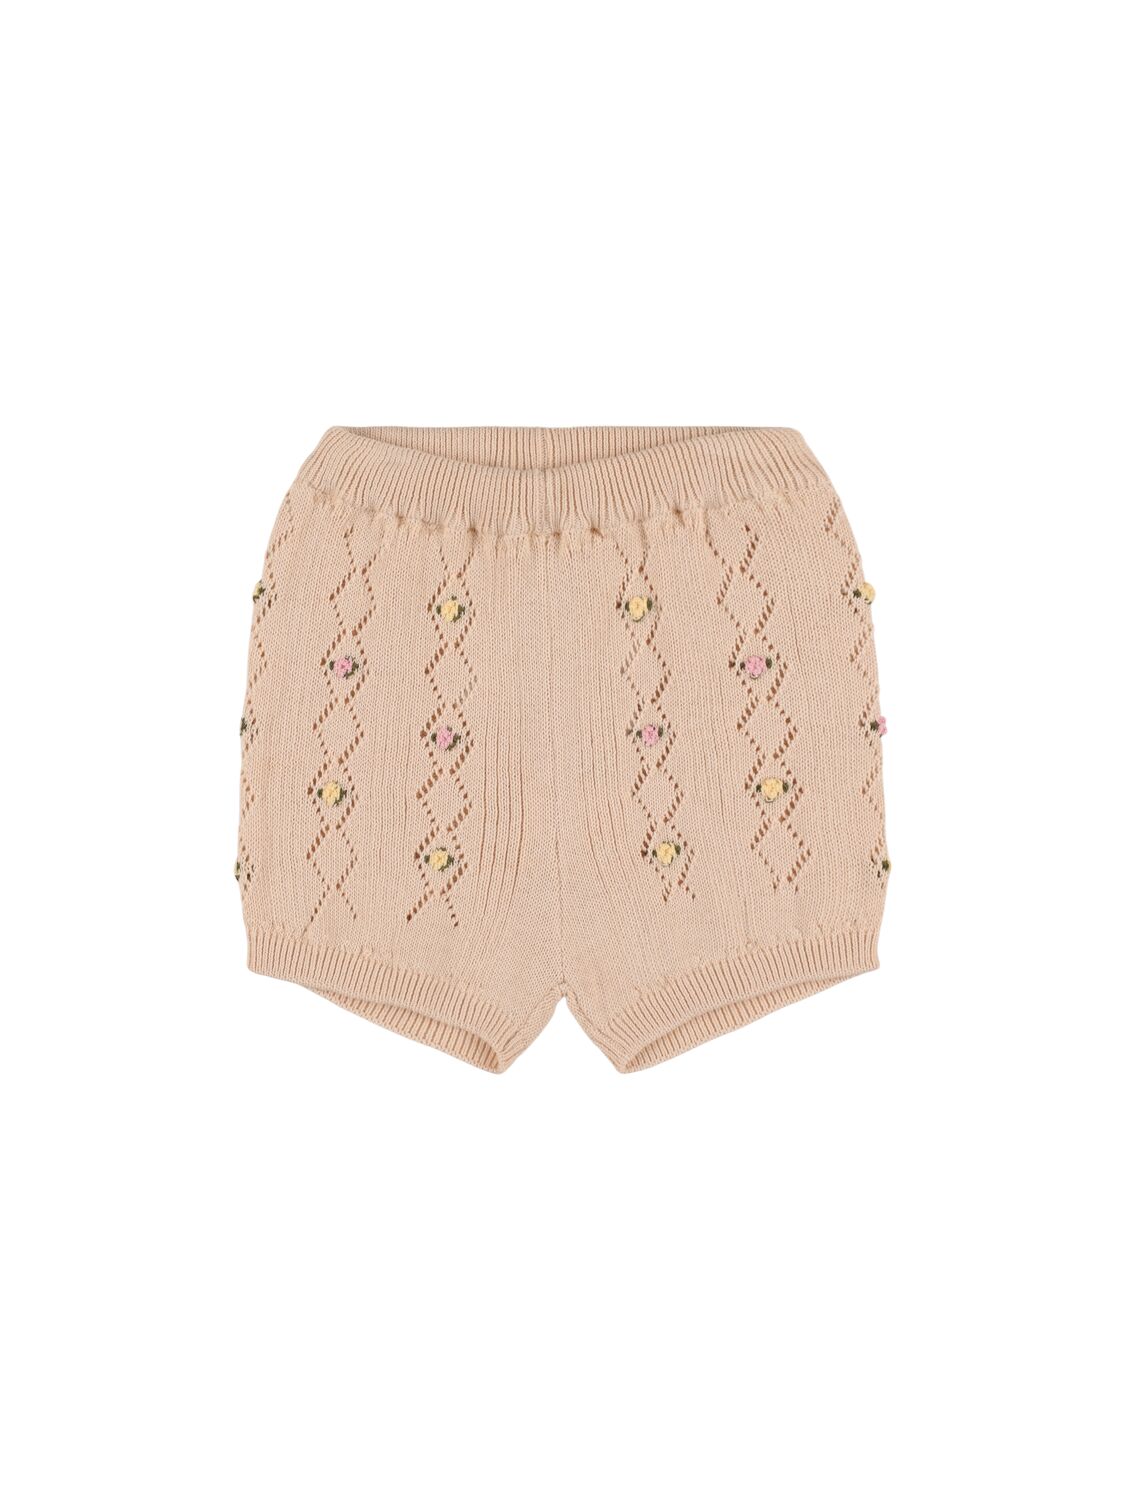 The New Society Kids' Organic Cotton Knit Shorts In Brown